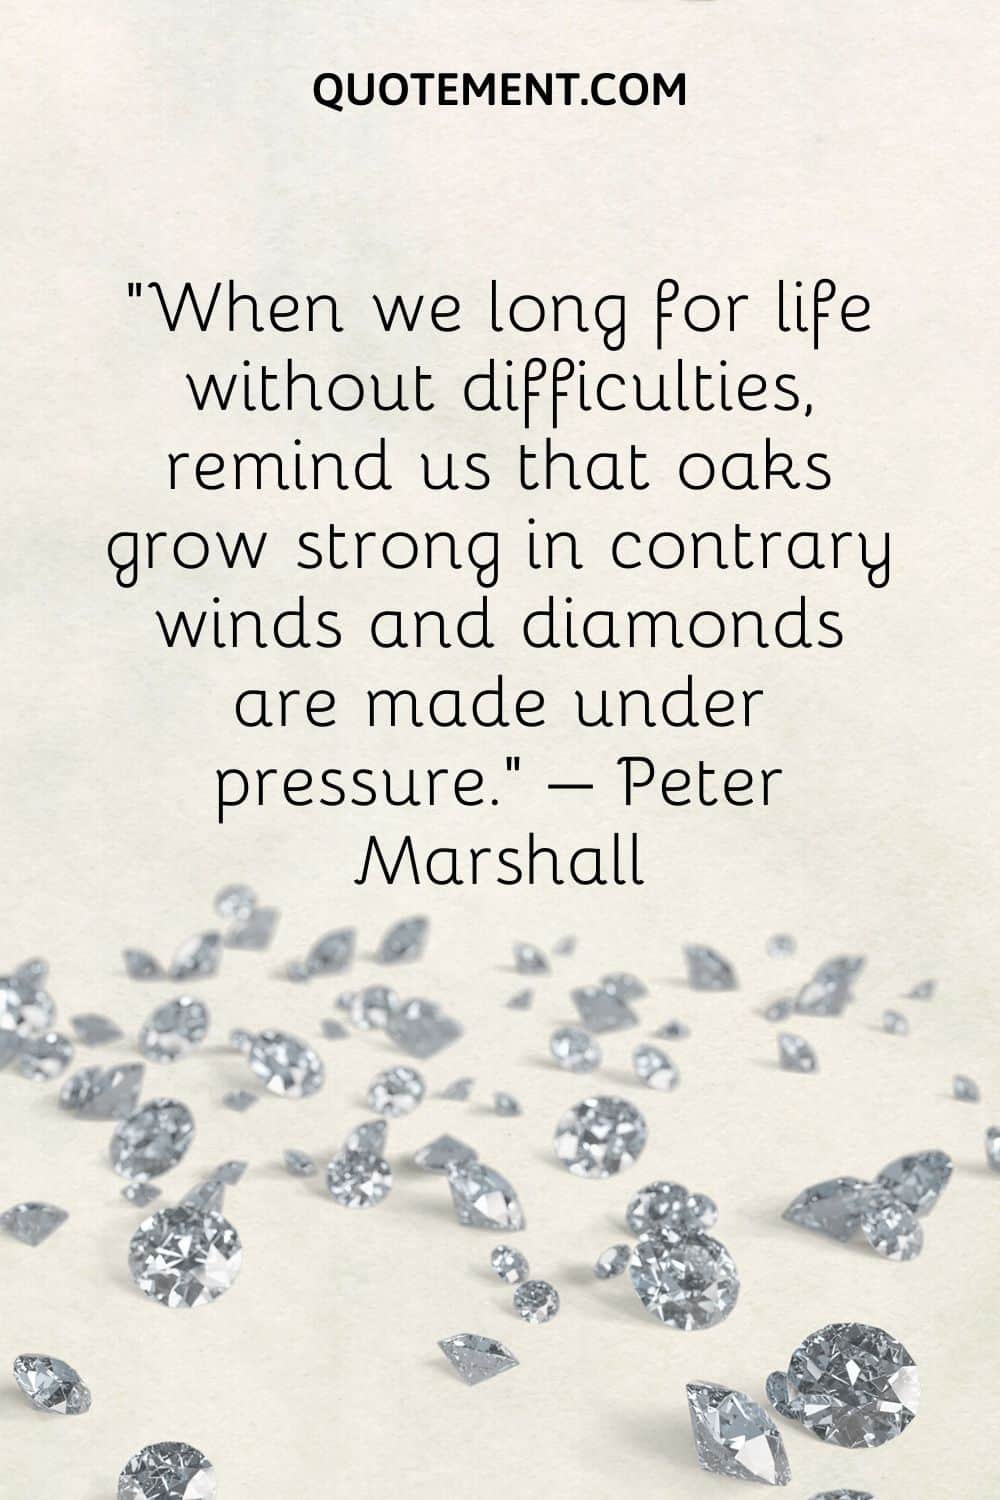 When we long for life without difficulties, remind us that oaks grow strong in contrary winds and diamonds are made under pressure